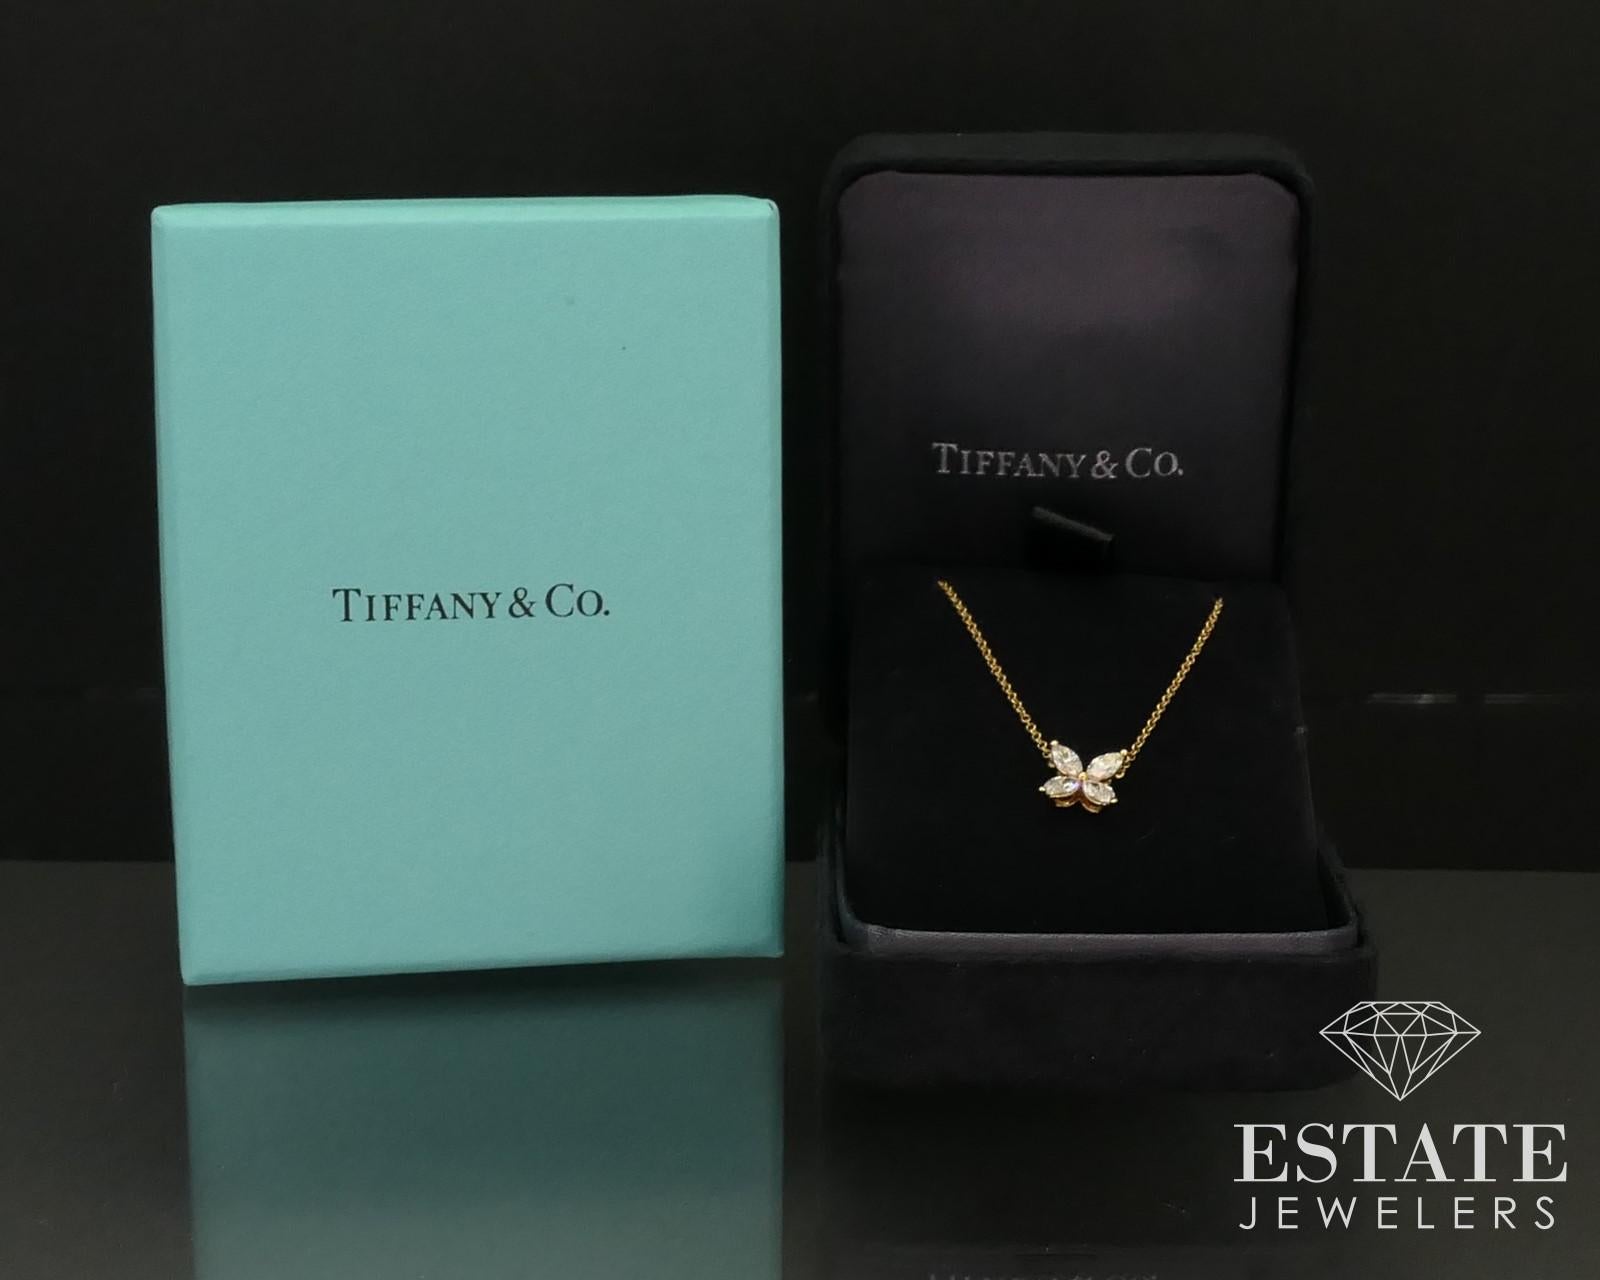 Stunning Tiffany & Co. necklace from the Victoria line. Made from 18k rose gold on the Medium pendant and chain. Approximately .46ctw  of sparkling marquise diamonds with VS clarity and H color. 16